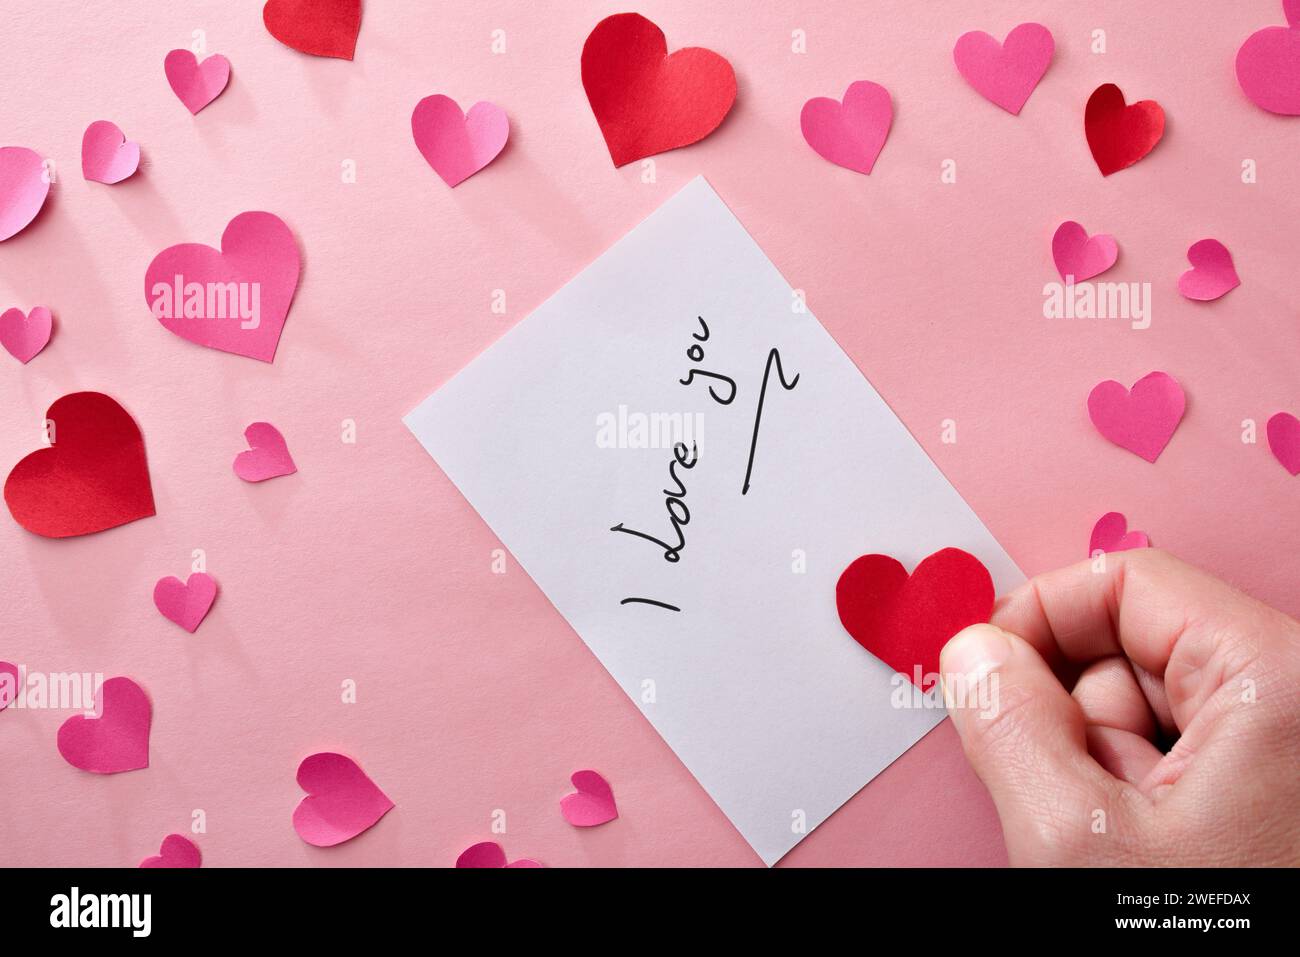 Romantic note with writing I love you on white paper on pink background with hand with a red heart cutout and many hearts around. Top view. Stock Photo